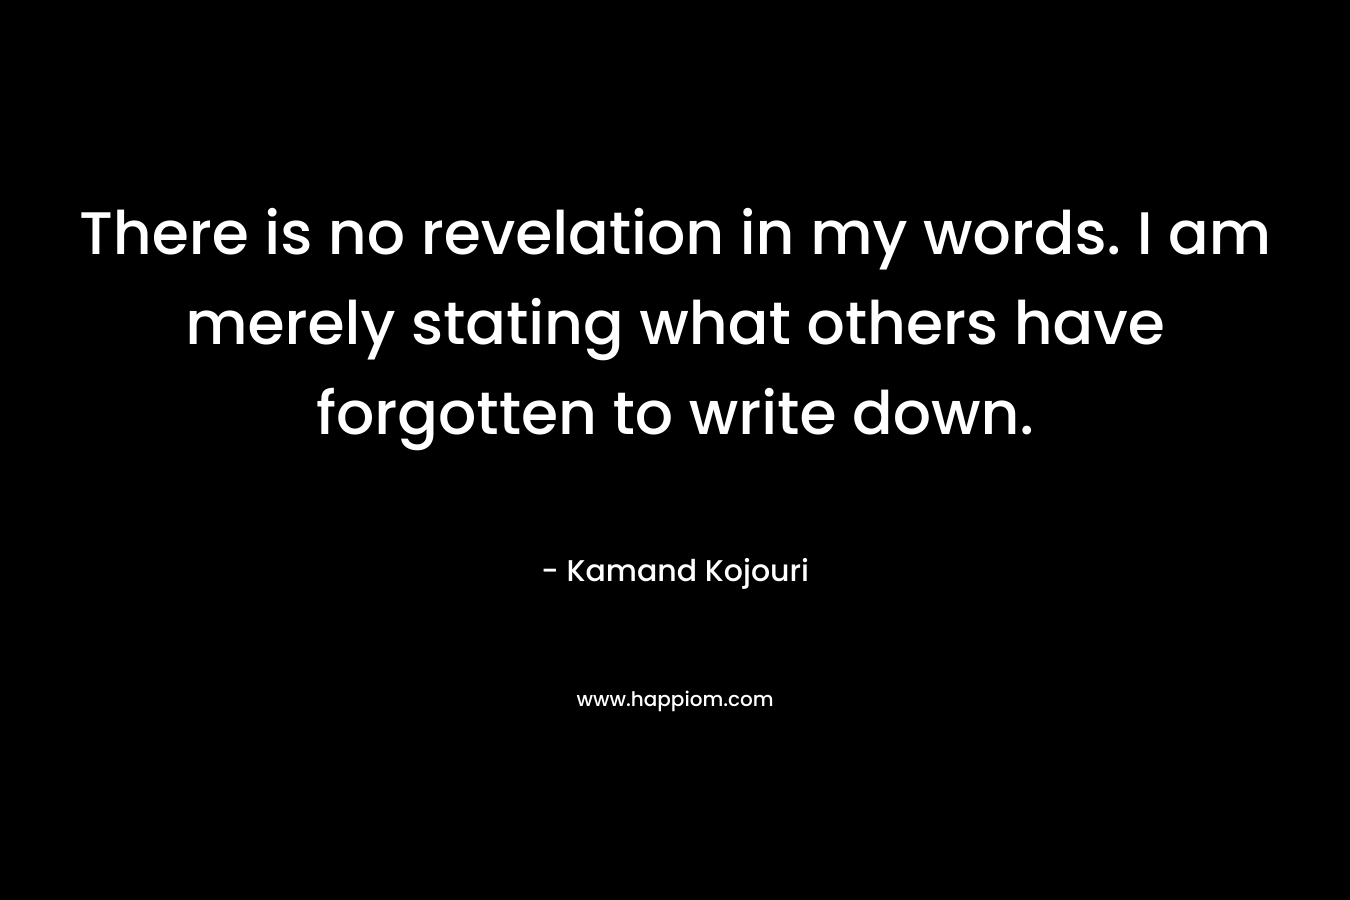 There is no revelation in my words. I am merely stating what others have forgotten to write down.